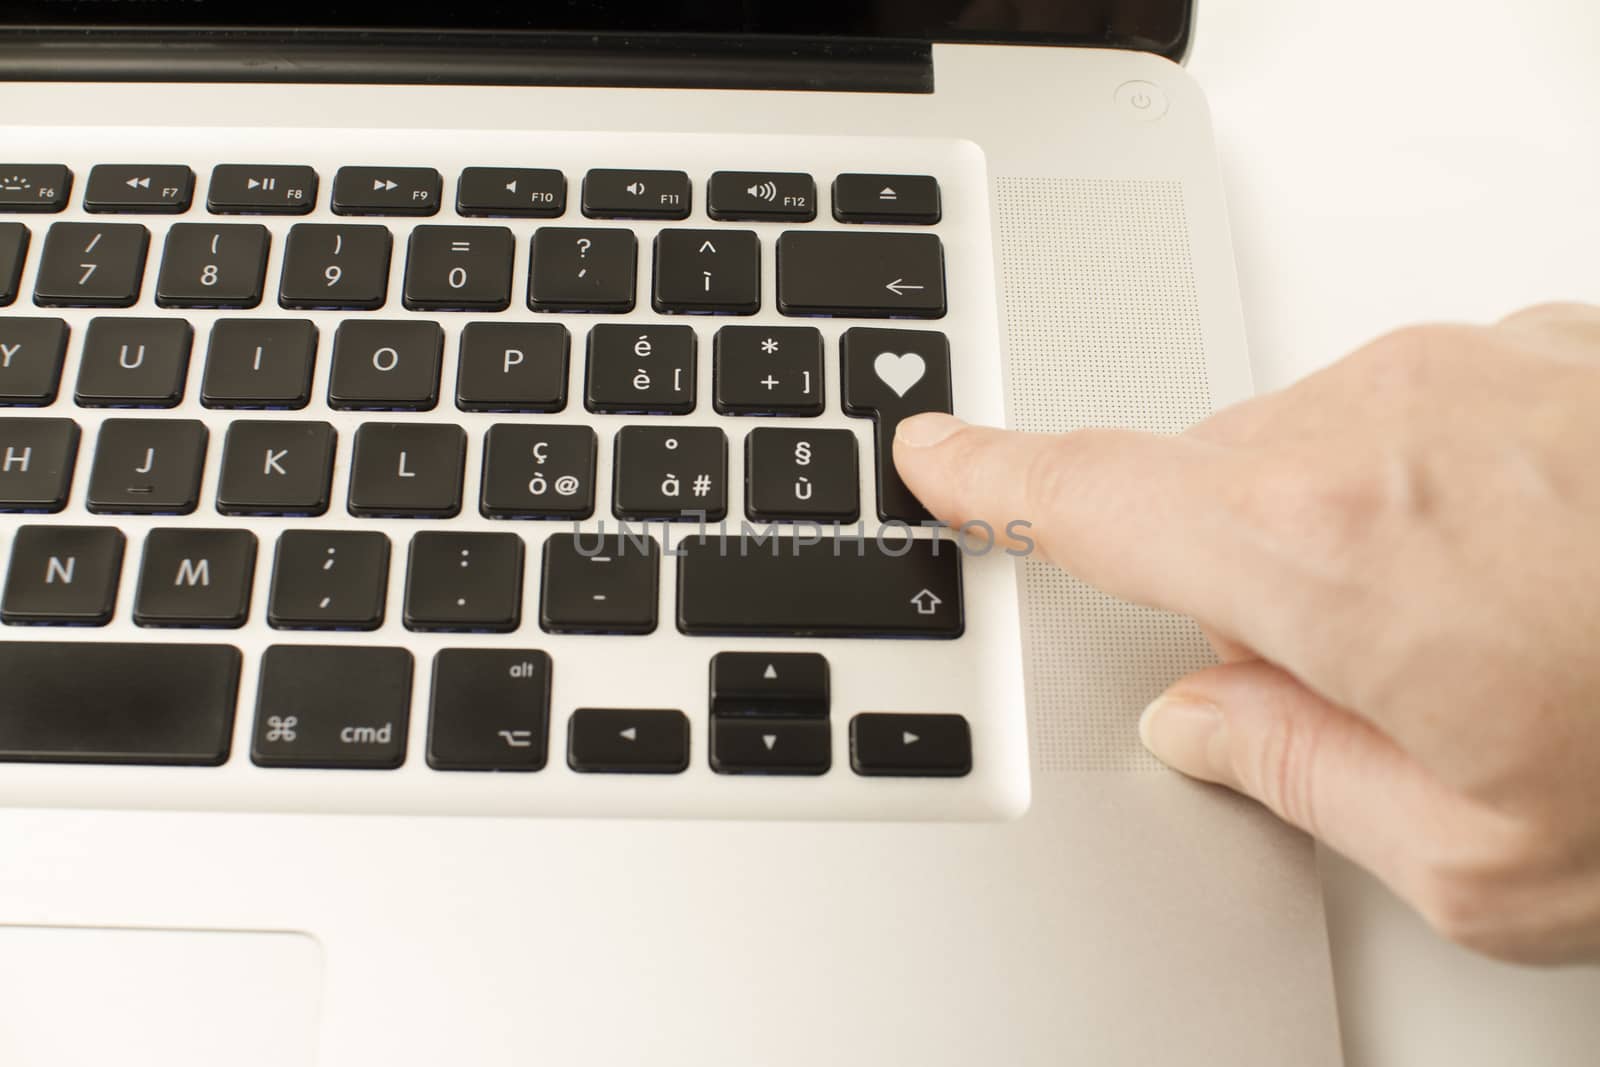 Technology also applies to emotional relationships: a woman's hand is about to press a key on a laptop keyboard with a stamped heart